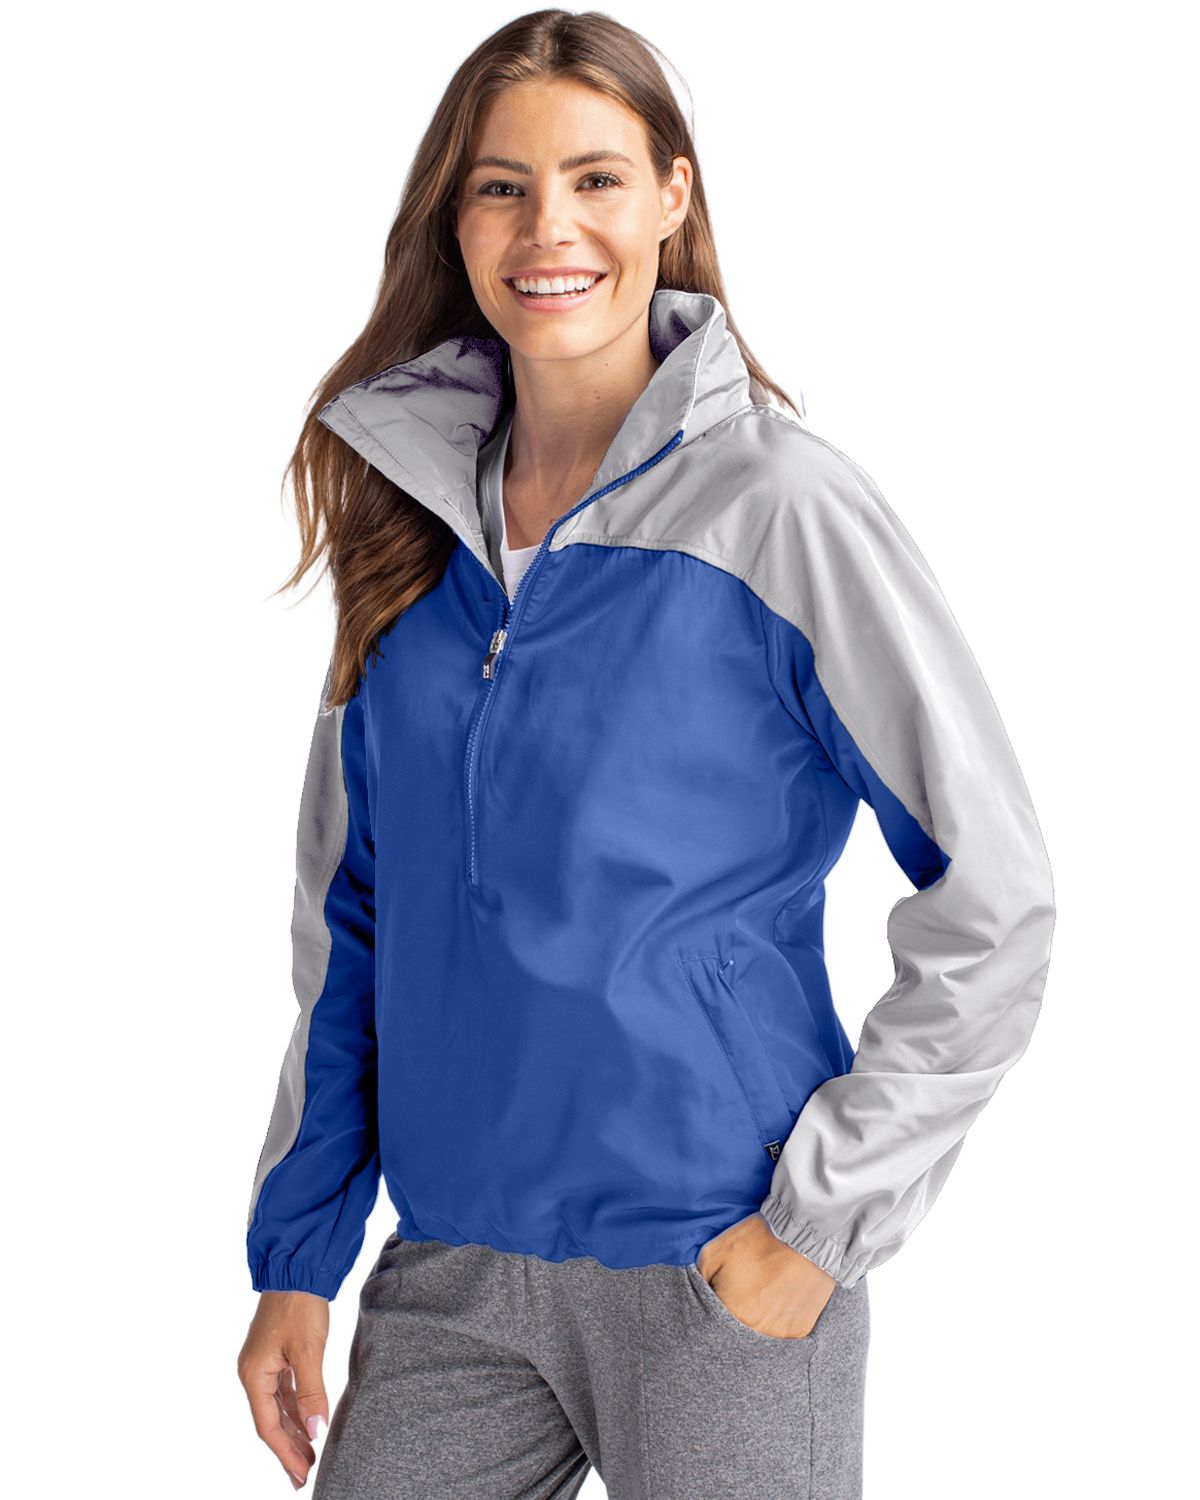 Cutter Buck Charter Eco Knit Recycled Womens Anorak Jacket - Tour blue/polished